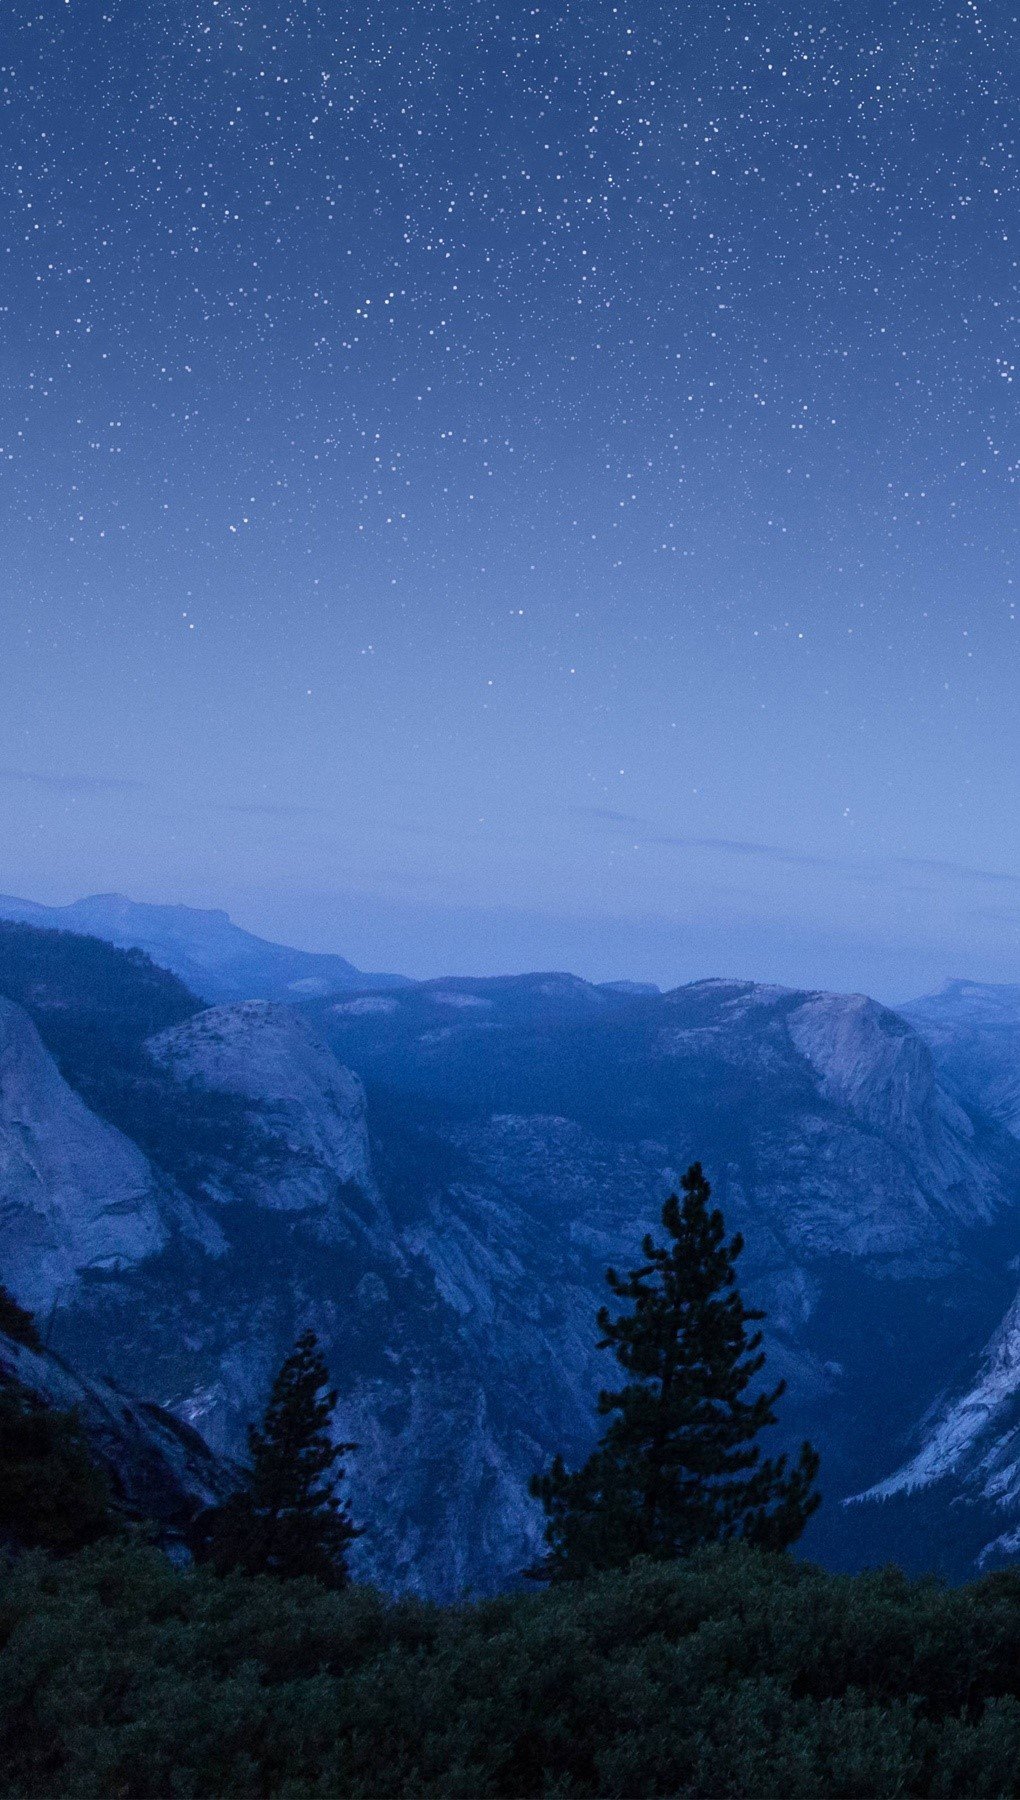 Wallpaper Image of mountains in Apple OS Vertical